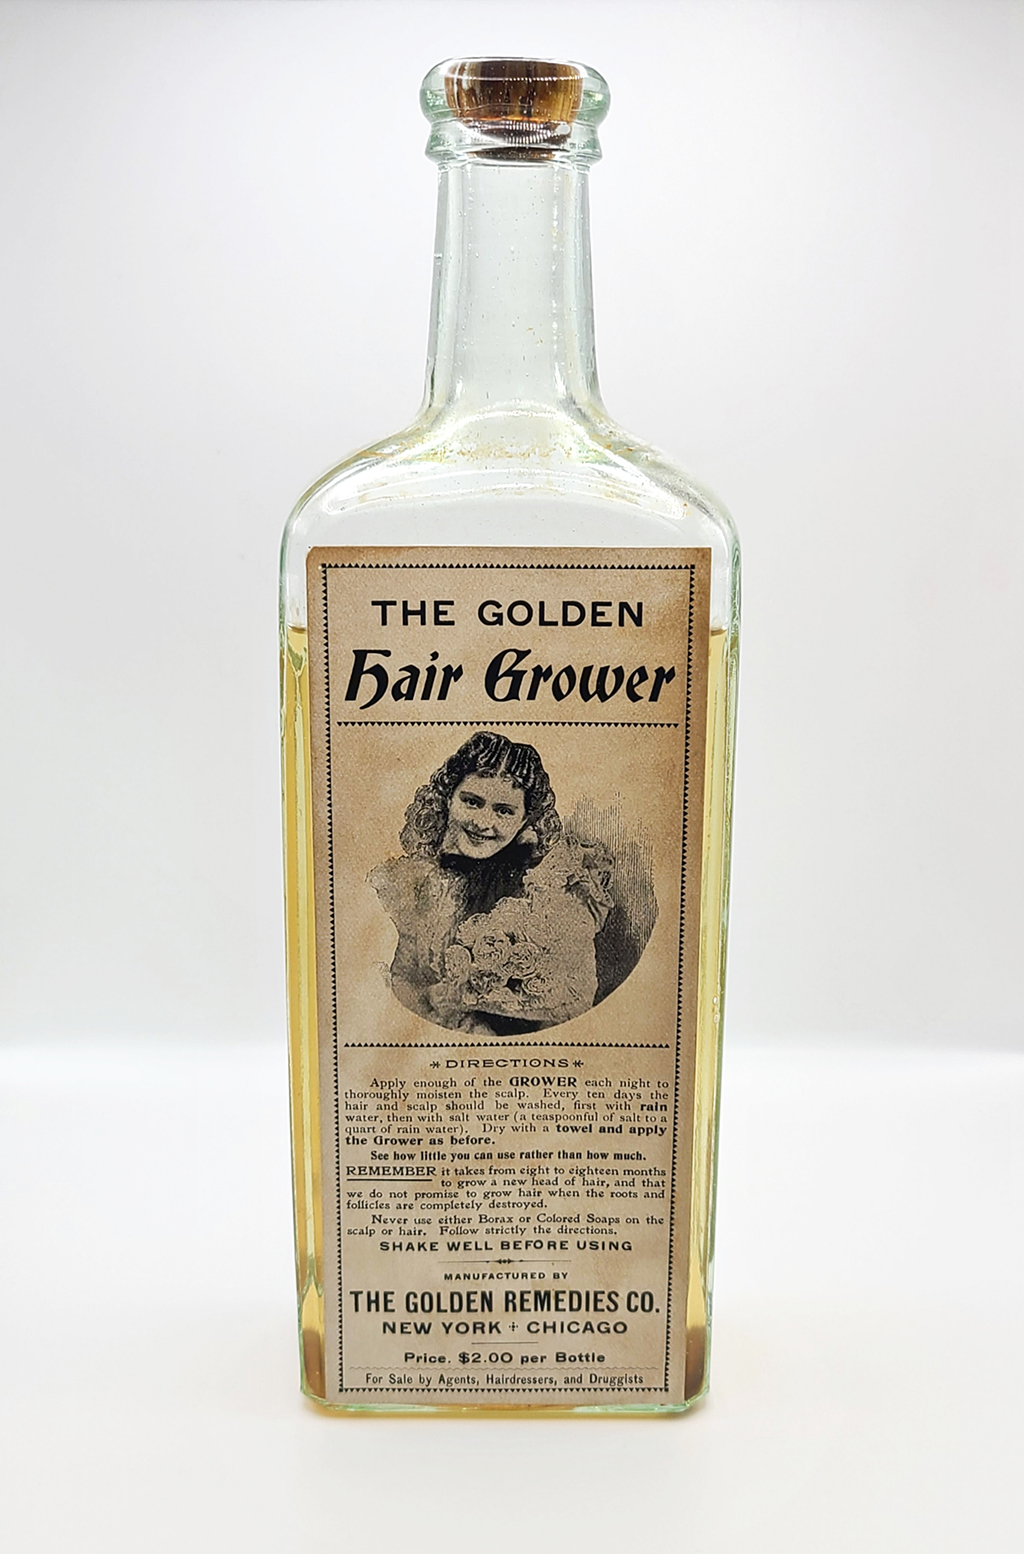 Clear bottle with a label "The Golden Hair Grower" which shows a smiling woman.